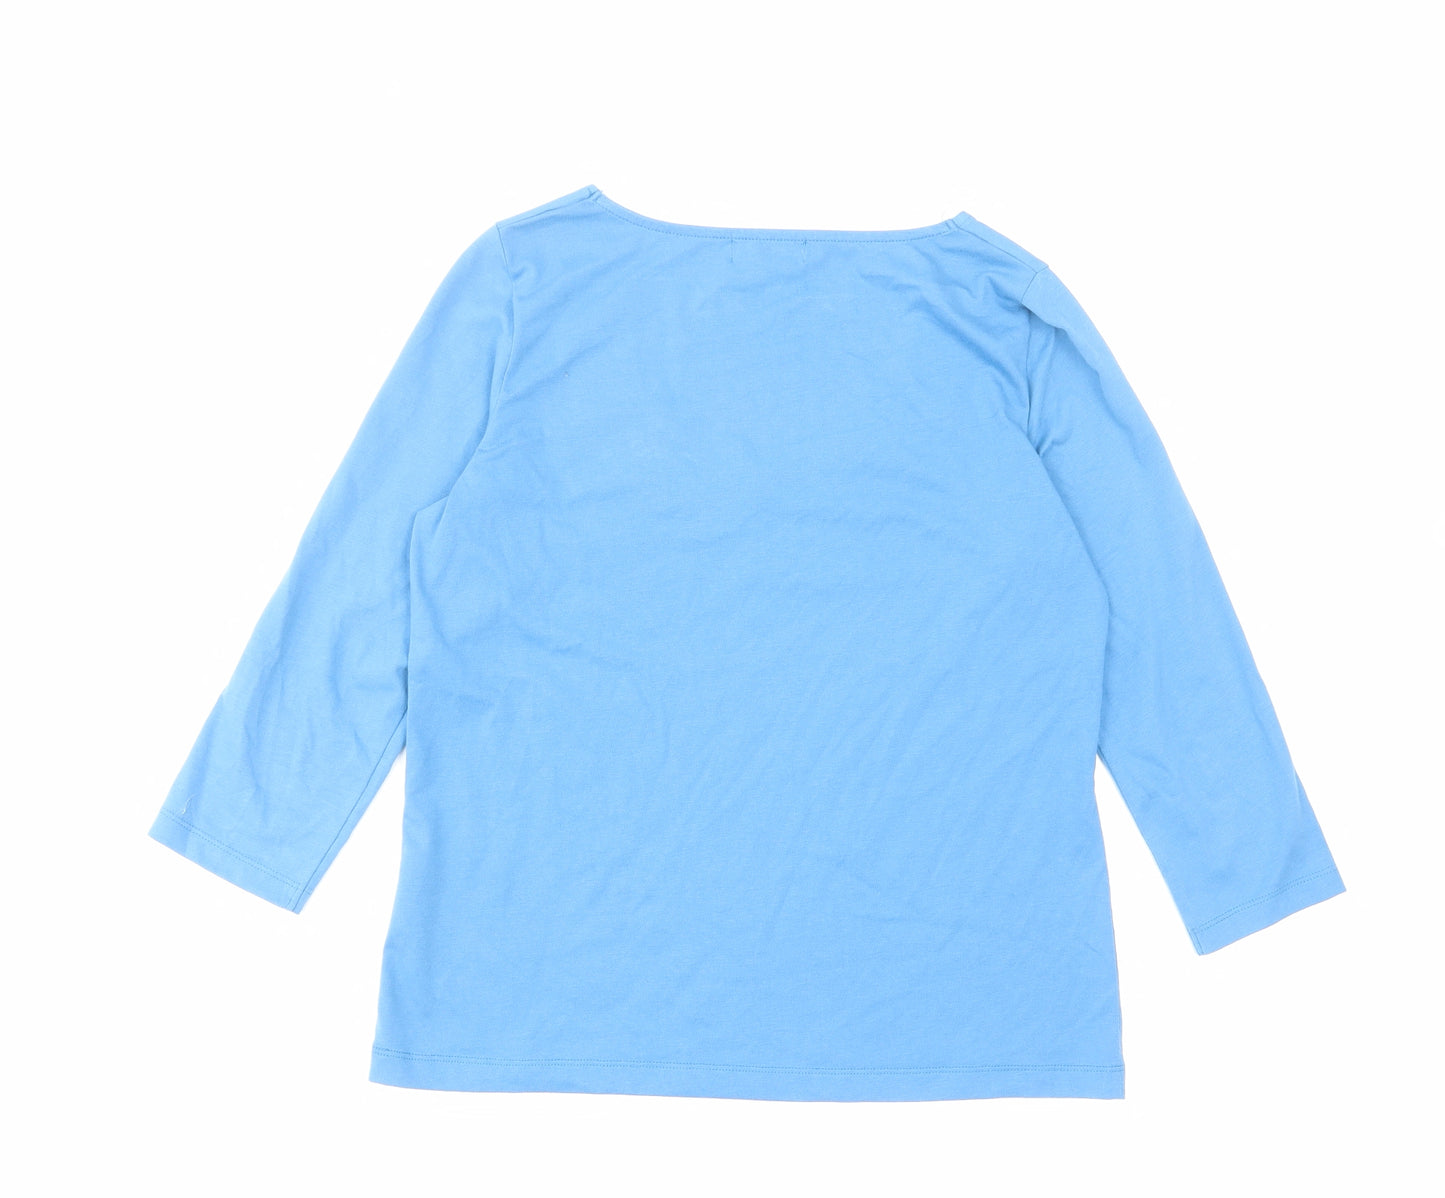 Per Una Womens Blue Cotton Basic T-Shirt Size 12 Scoop Neck - Embroided